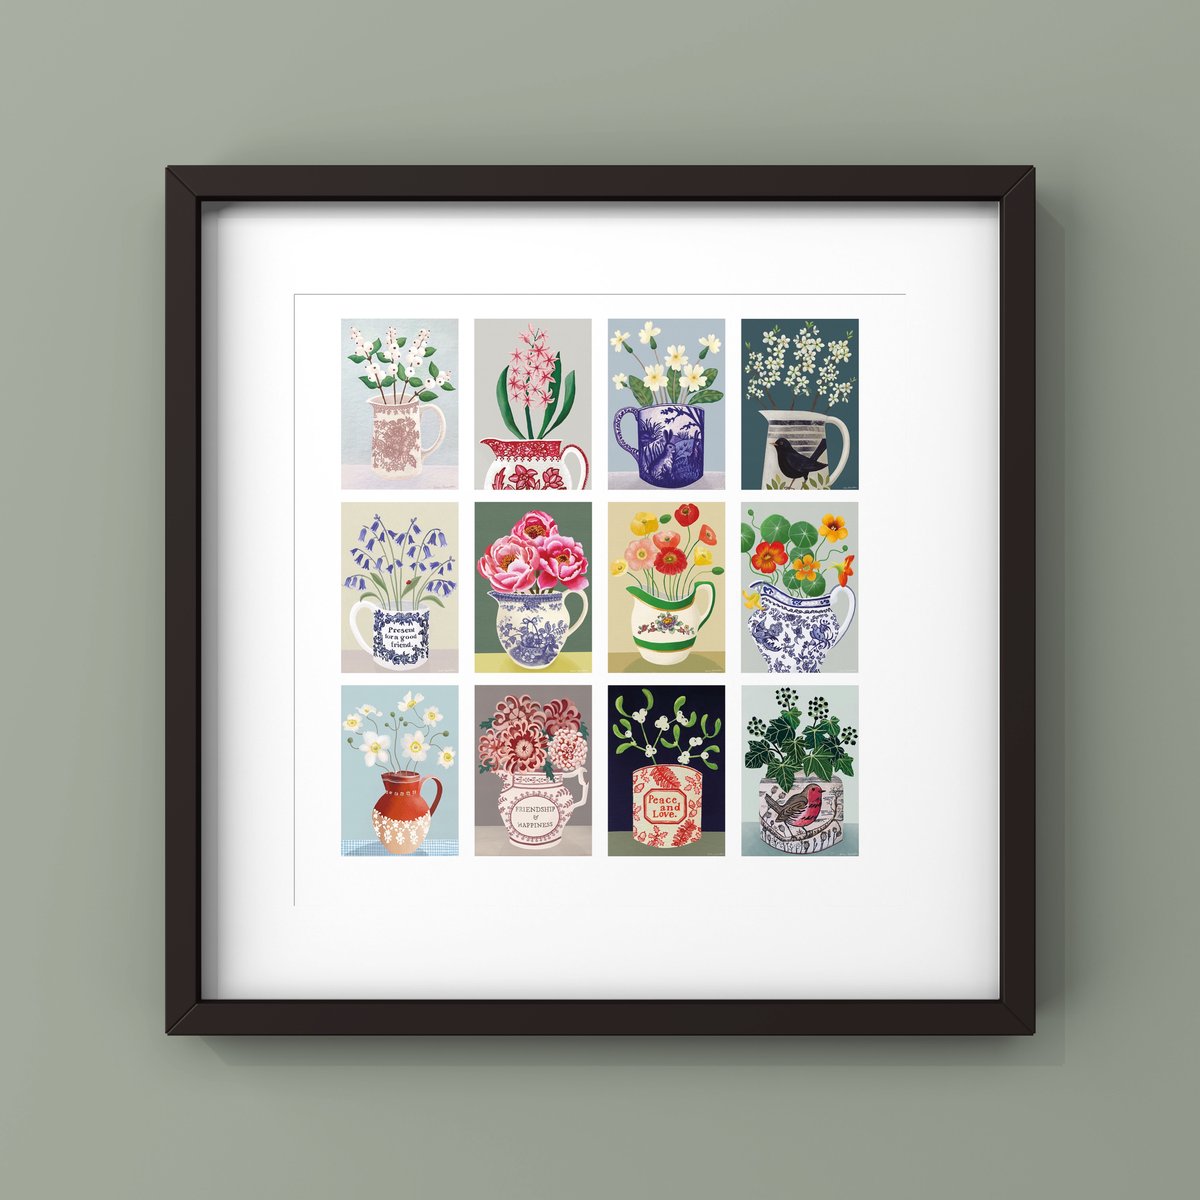 A Year in the Garden Limited Edition Print